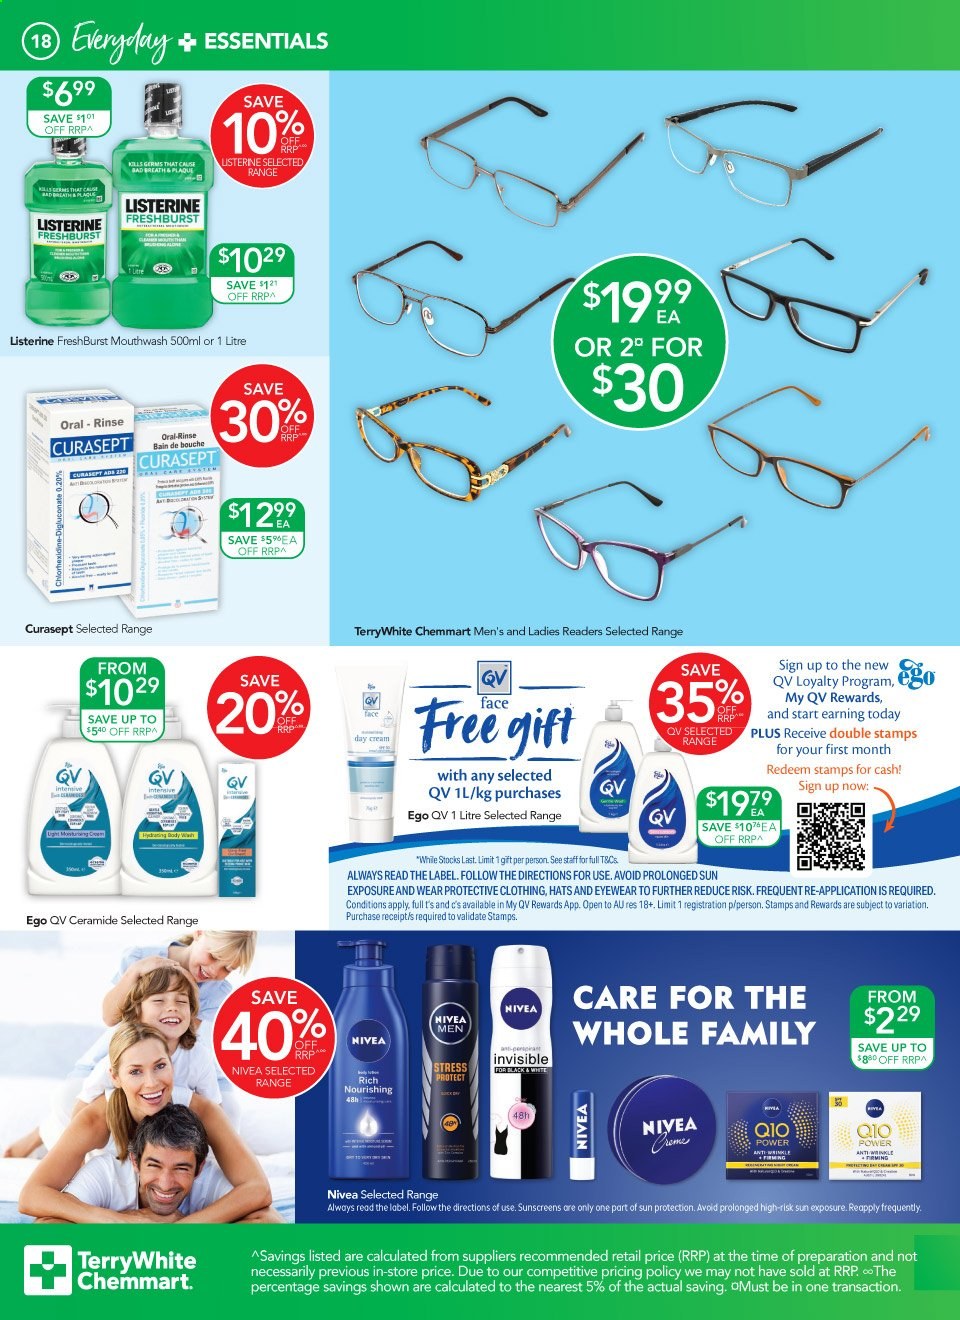 thumbnail - TerryWhite Chemmart Catalogue - 4 Mar 2021 - 23 Mar 2021 - Sales products - Nivea, Listerine, mouthwash, day cream. Page 18.